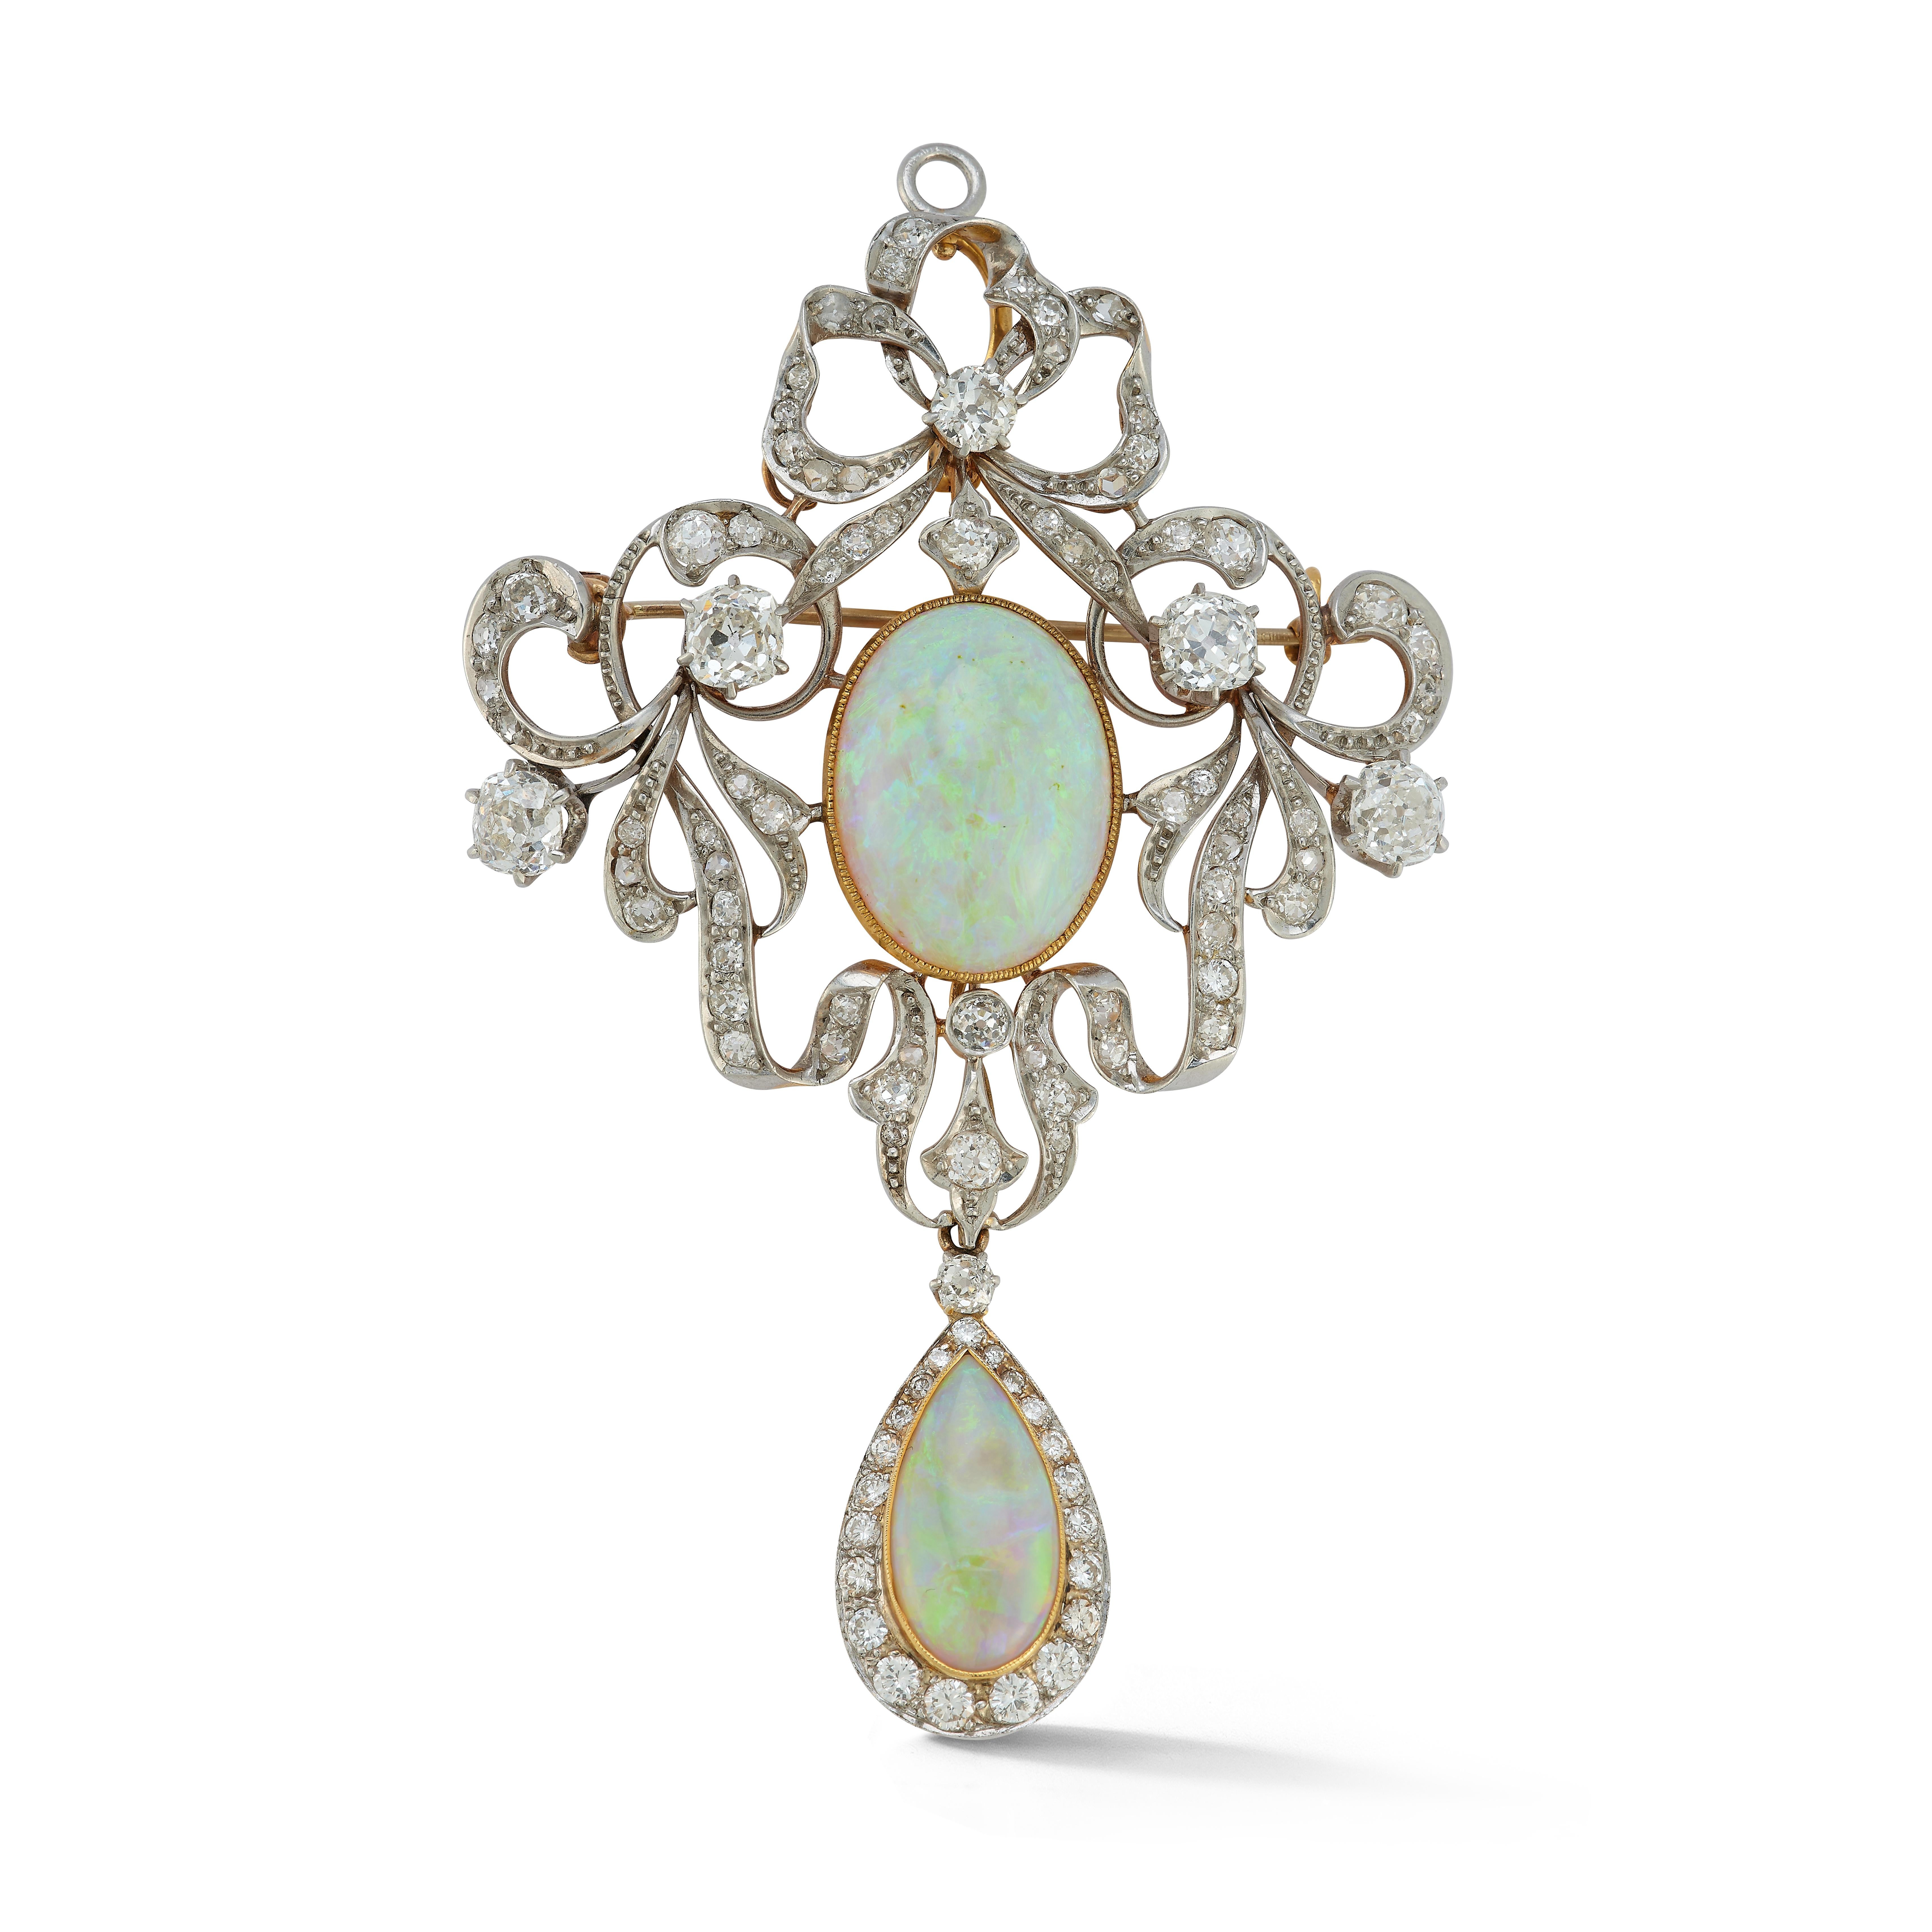 Opal & Diamond Brooch

1 center opal surrounded by 5 large old mine diamonds & 91 small round cut diamonds, suspending a  pear shape cabochon opal set with round cut diamonds 

Center Opal Weight: approximately 15.00 carats
Opal Drop Weight: